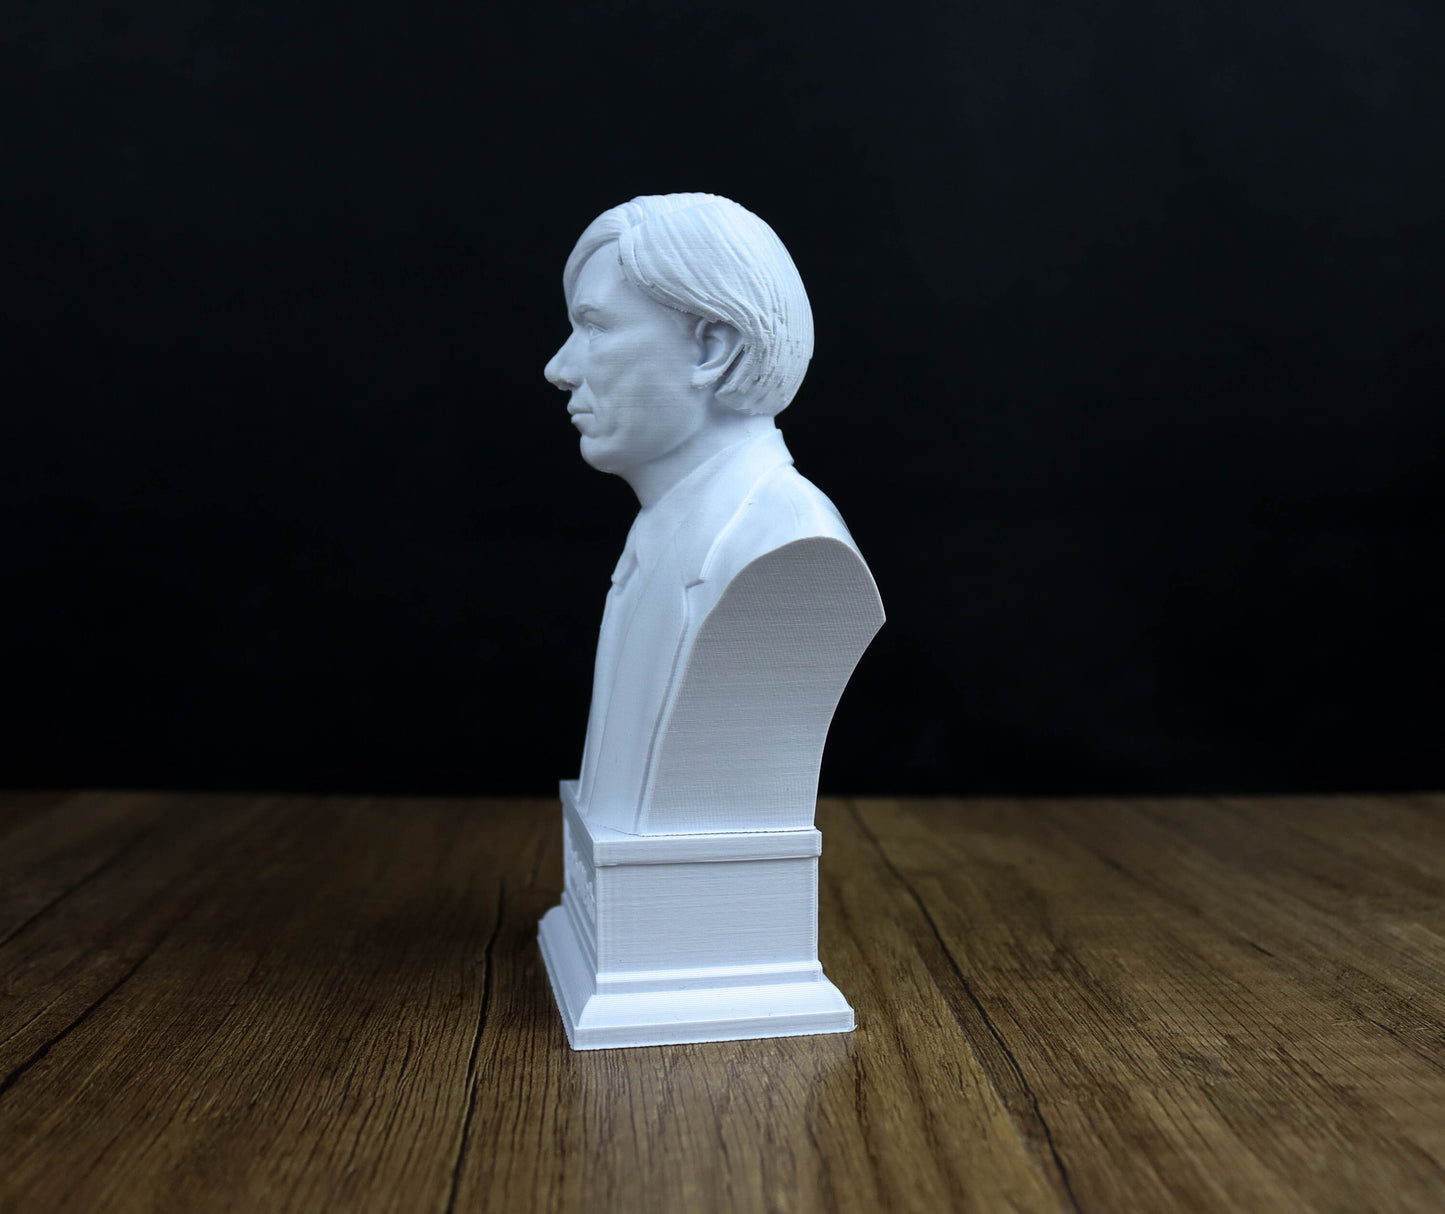 Andy Warhol Bust, American writer Statue, Sculpture Decor